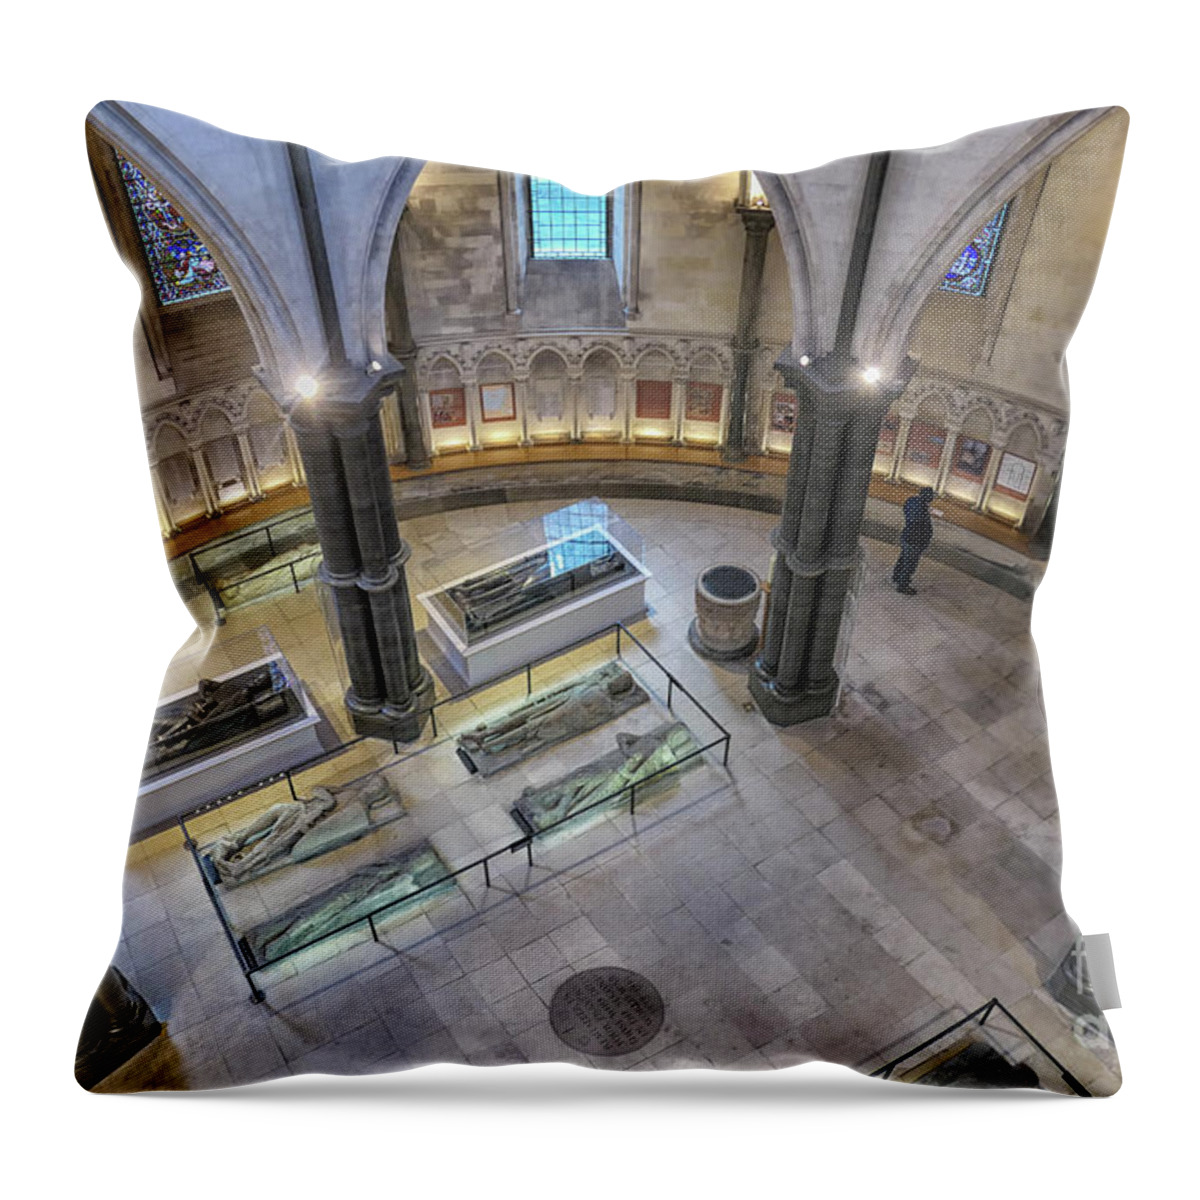 Europe Throw Pillow featuring the photograph Knights Templar sarcophaguses in London by Patricia Hofmeester